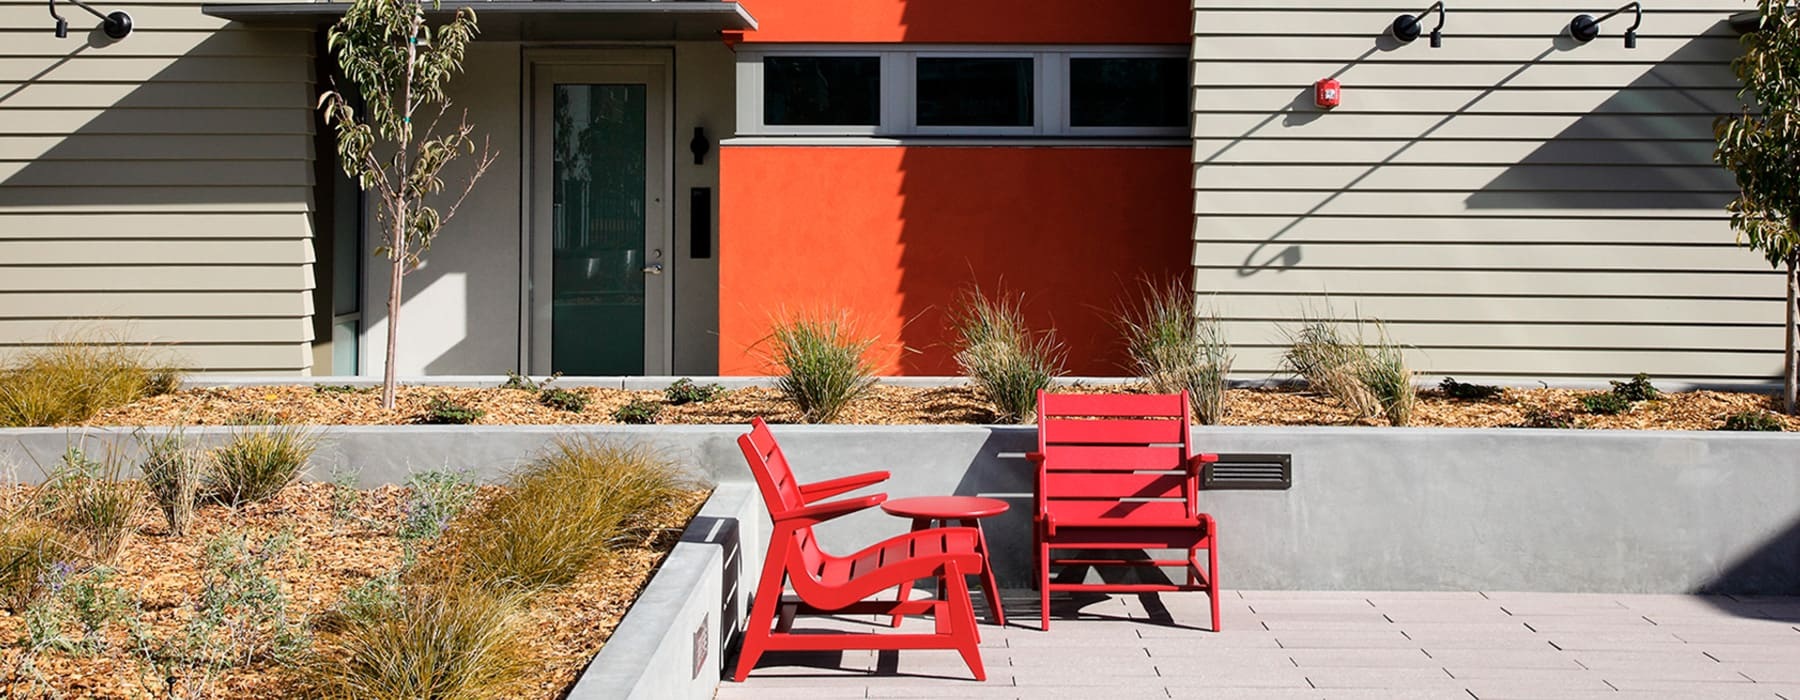 red chairs in front of modern buildings containing nearby landscaping